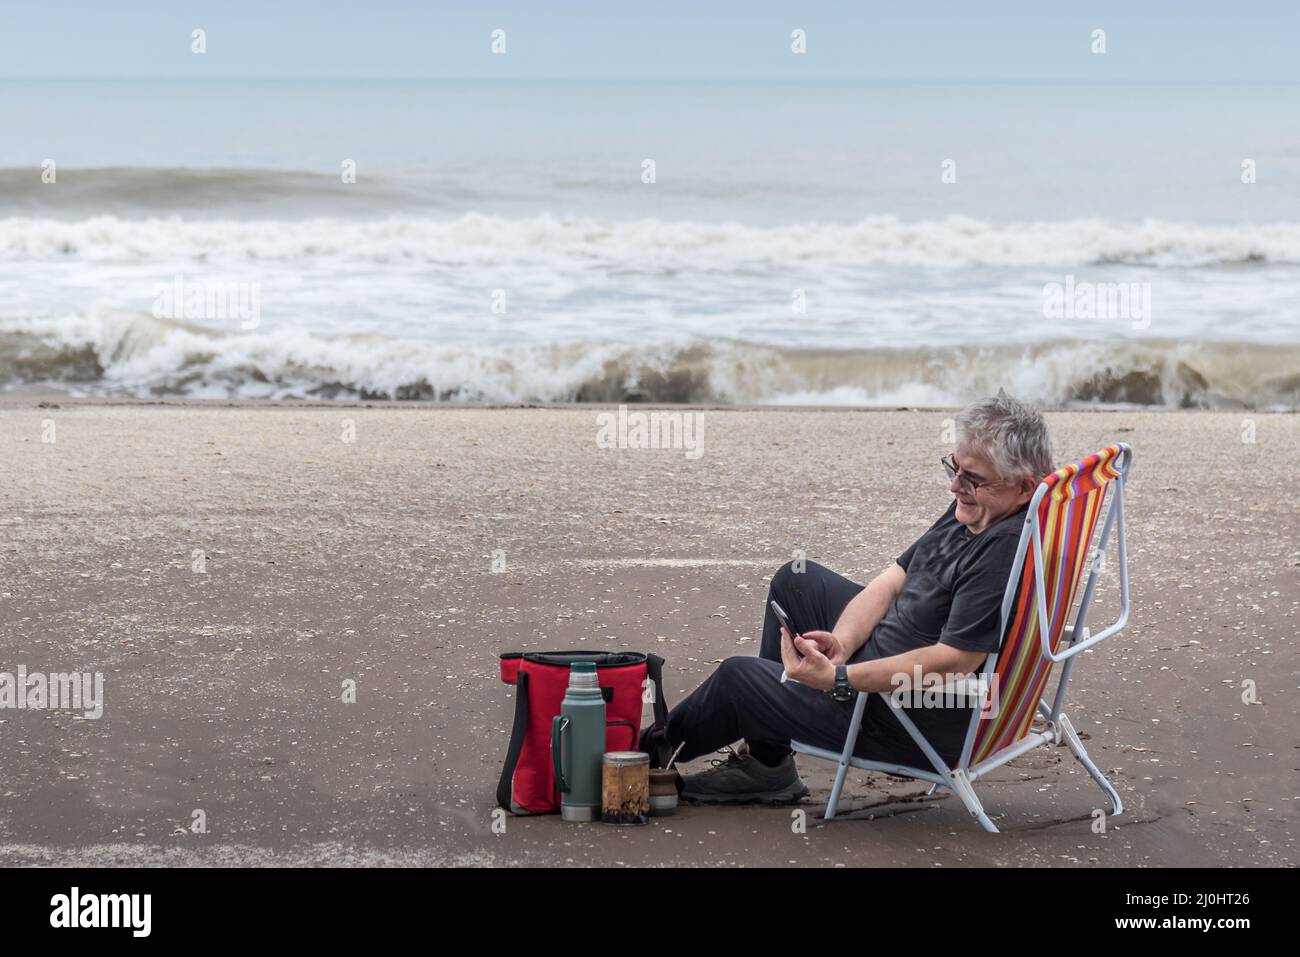 Mature man with gray hair and eyeglasses sitting on a beach chair smiling while looking at his smartphone. The waves of the sea in the background. Stock Photo